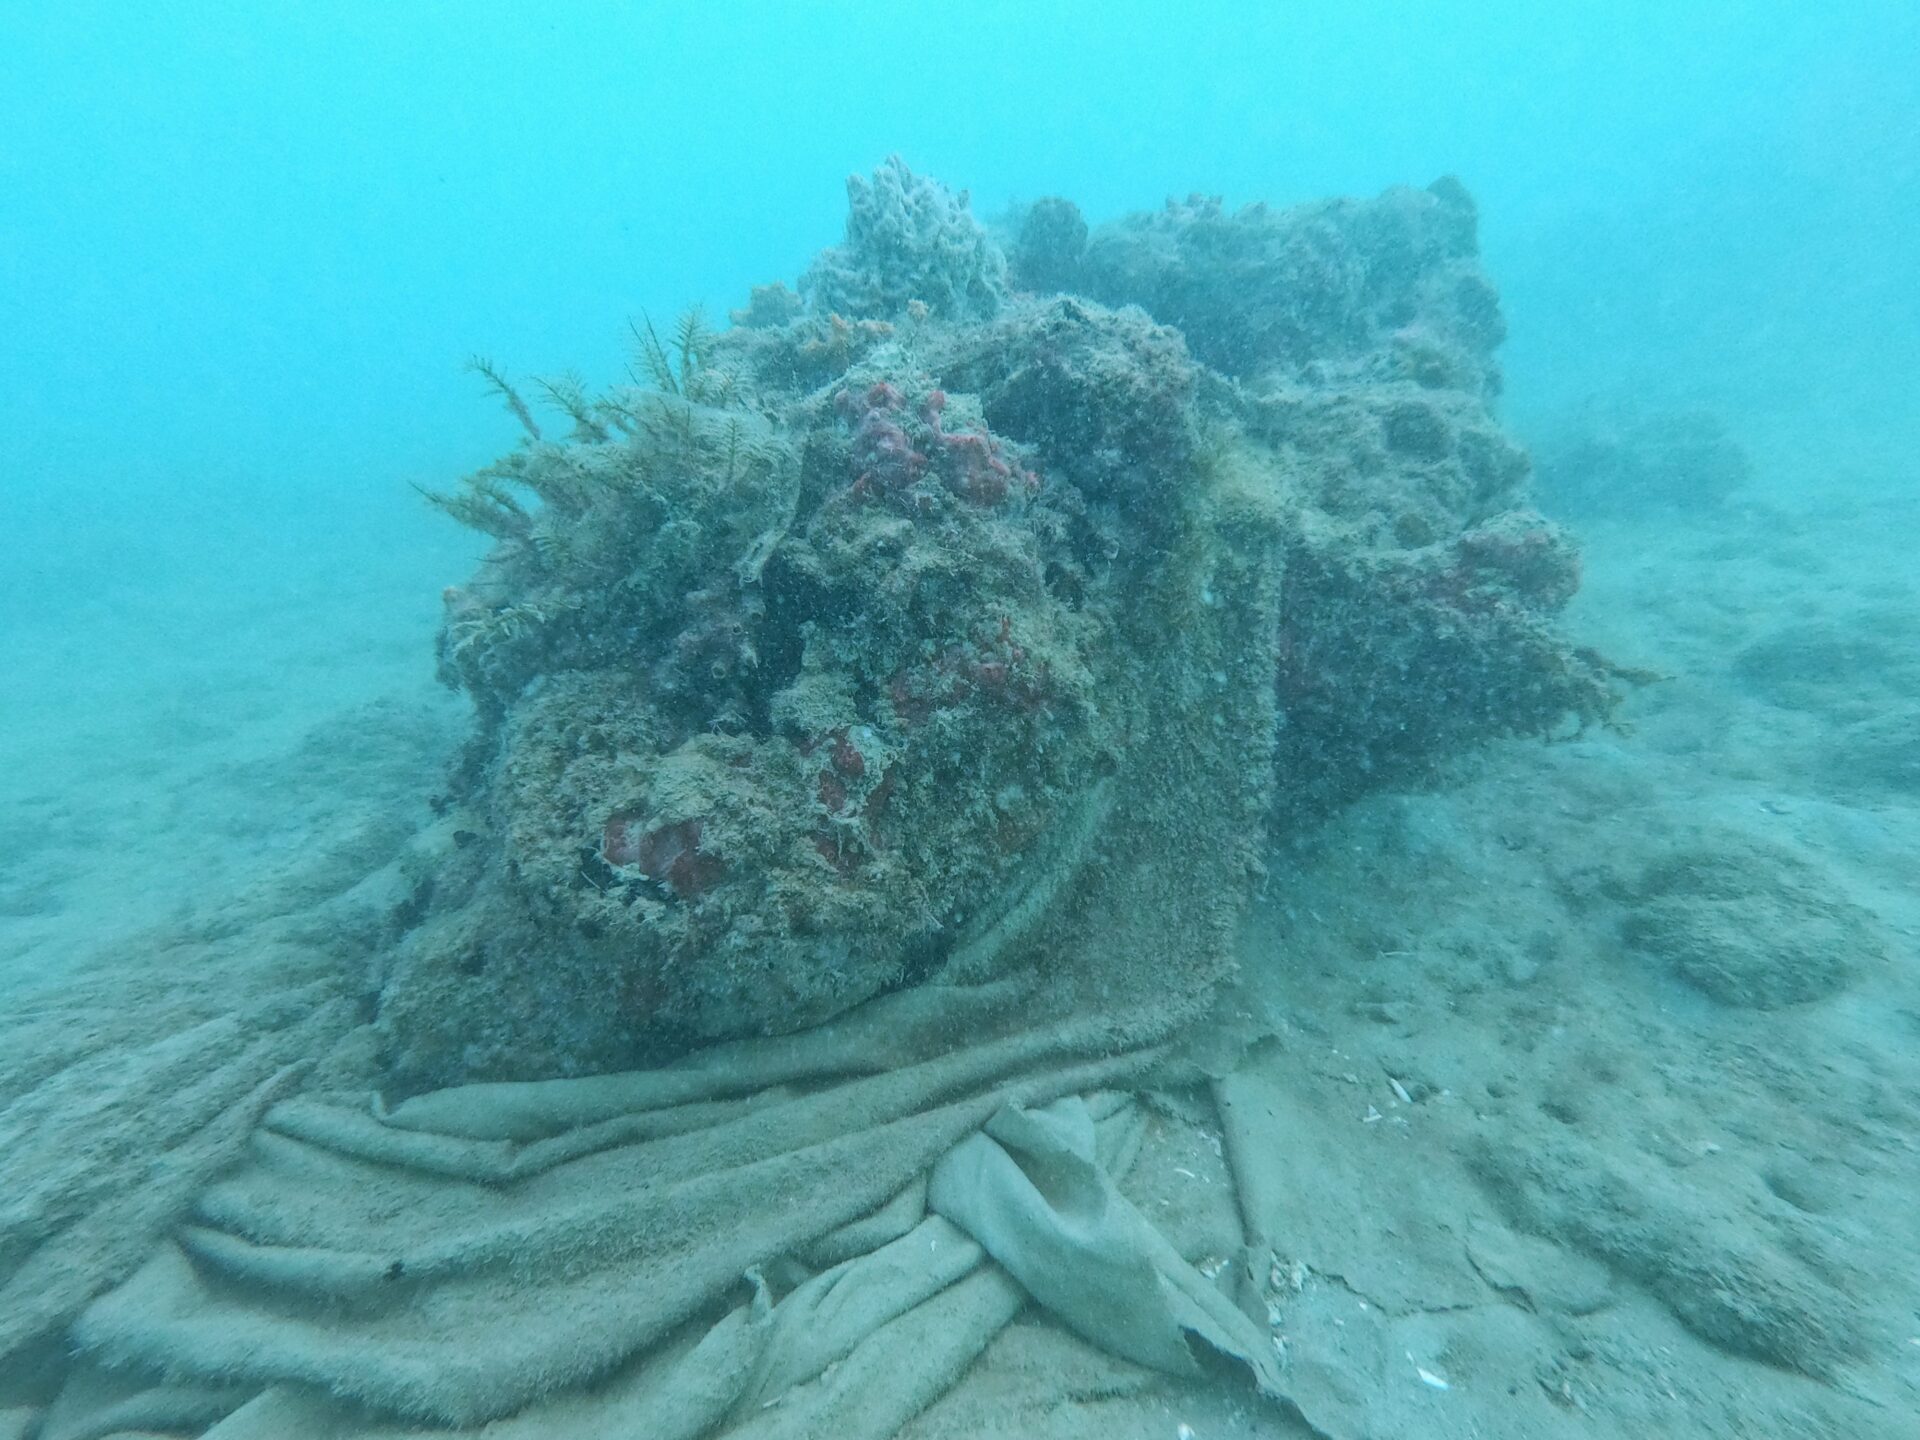 A white bed sheet wrapped around the base of a large coral head seen while diving at Point Panic